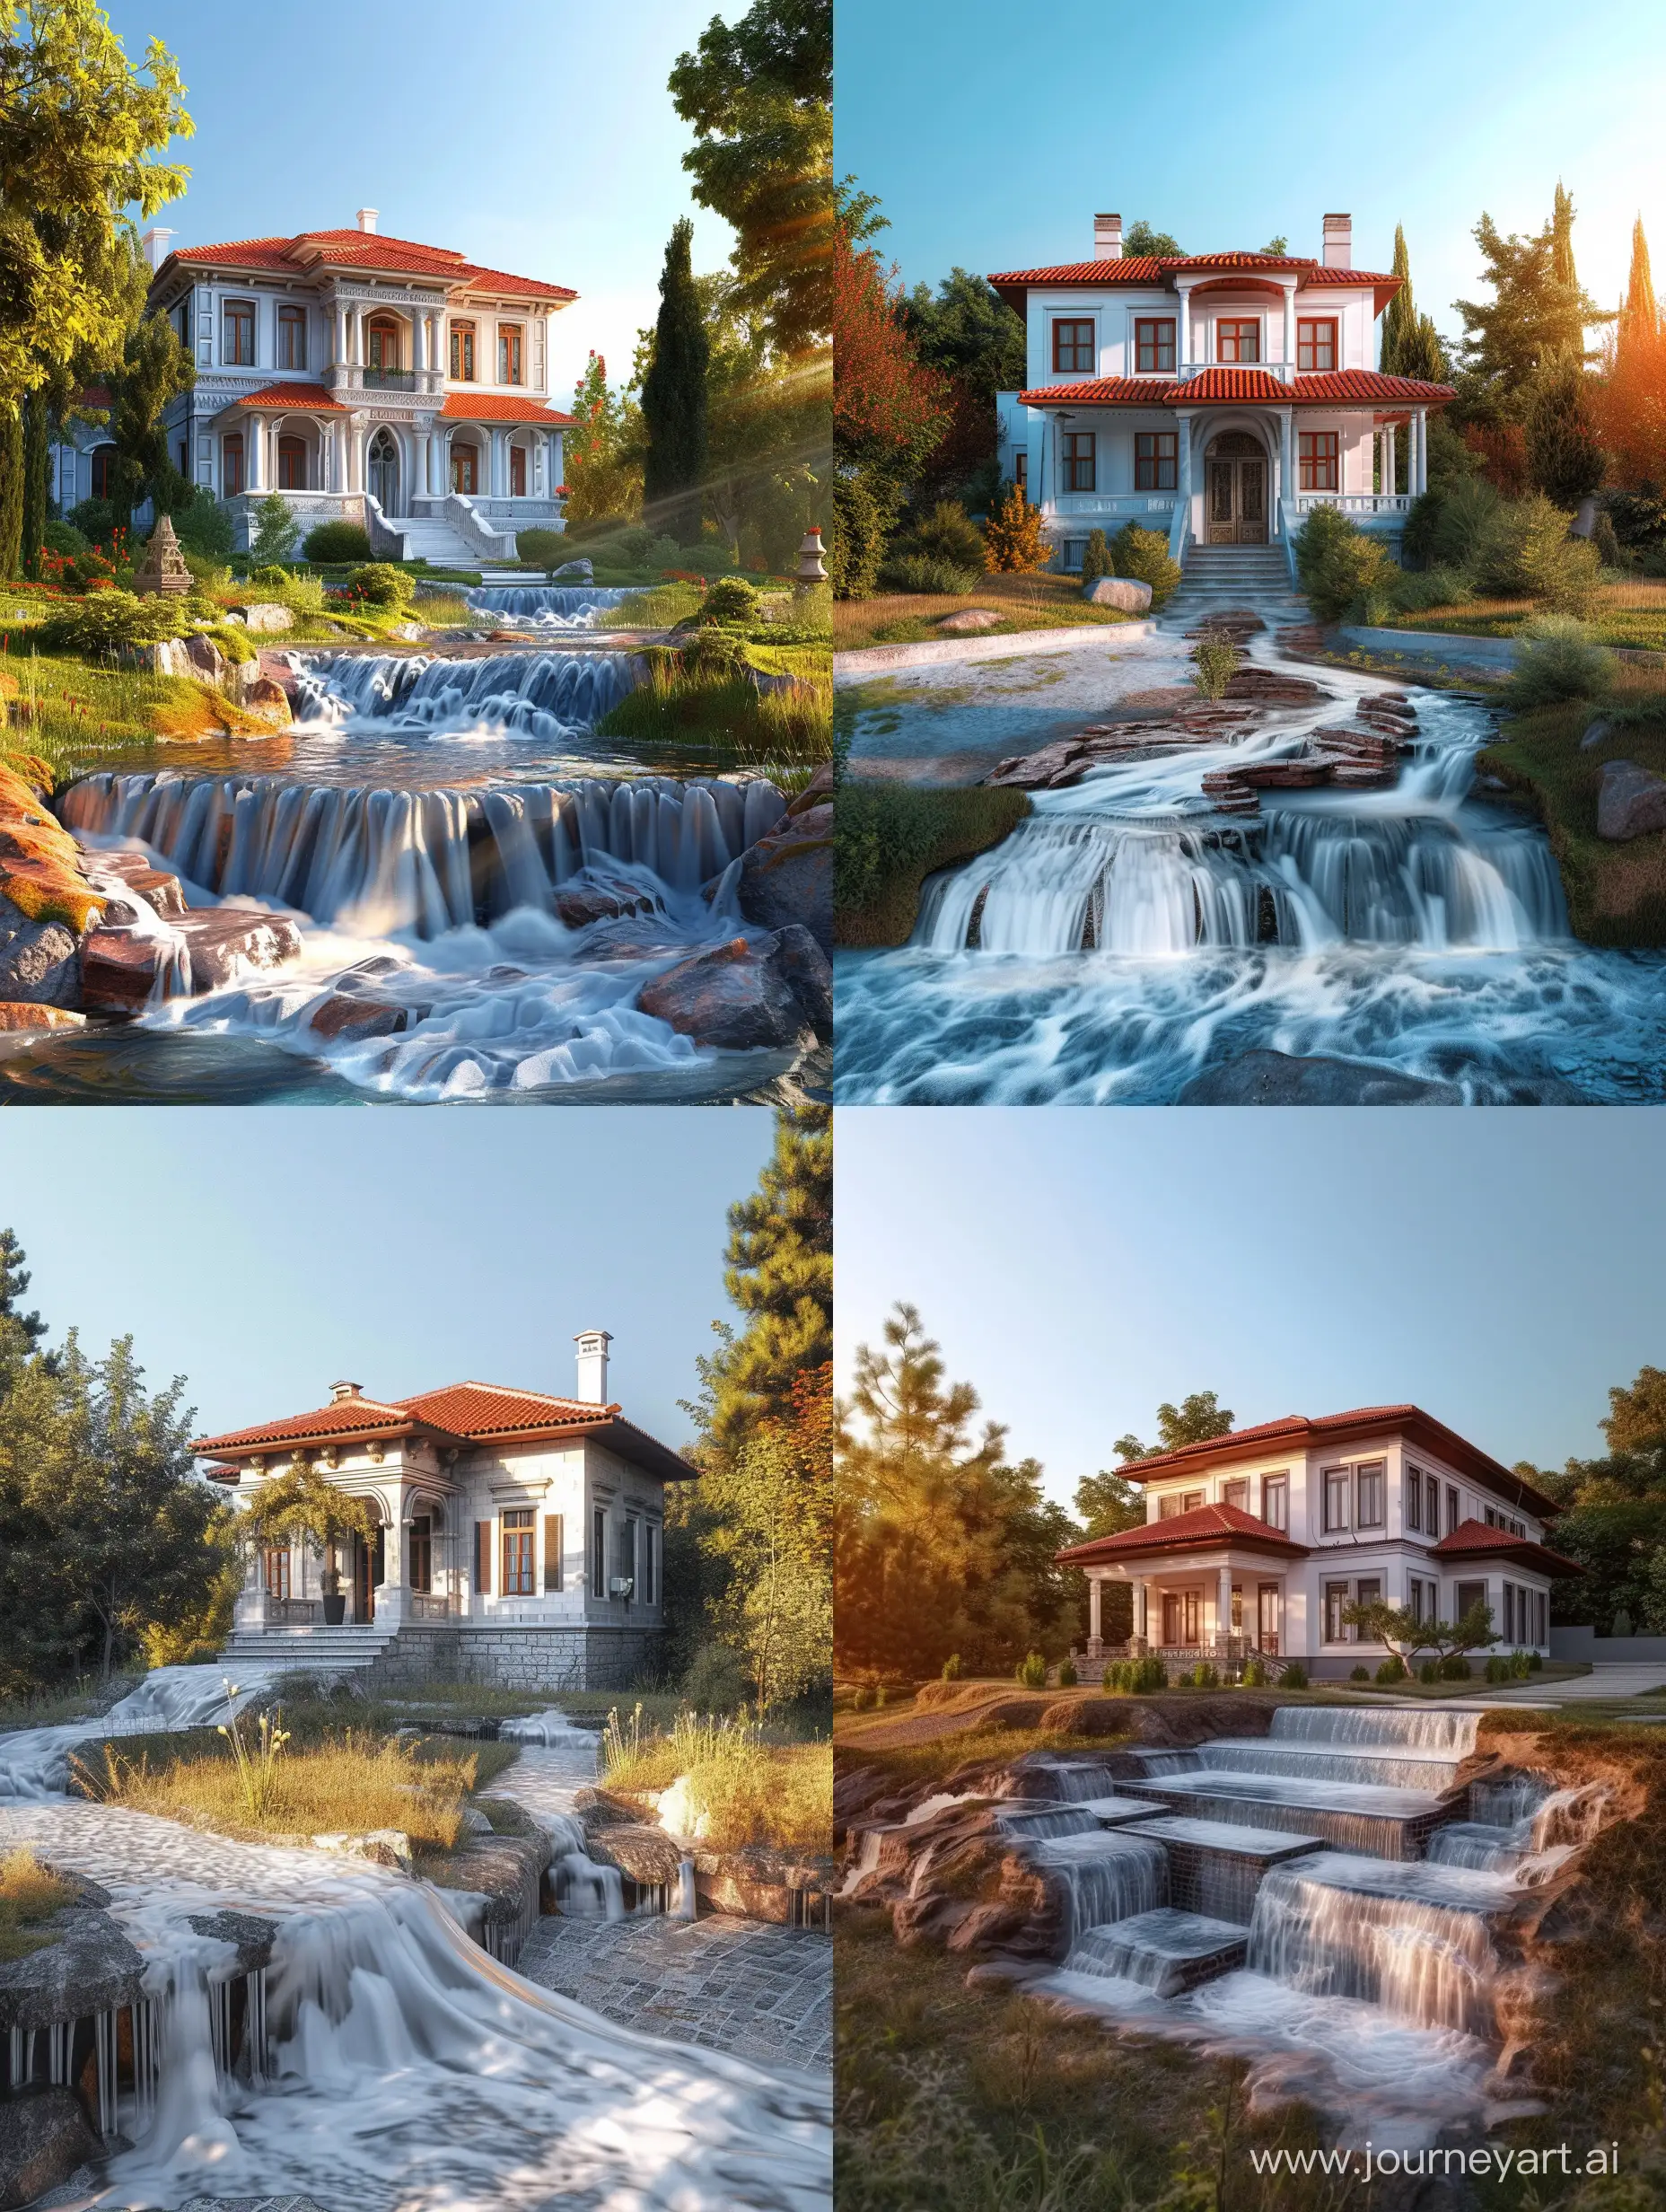 Create an image of a Turkish home with a 3D Trick Art installation in the front yard. The home should have traditional Ottoman architecture with a red-tiled roof and white walls. The 3D Trick Art should depict an optical illusion, such as a realistic-looking waterfall or a floating staircase, seamlessly integrated into the landscape in front of the home. The scene should be set under a clear blue sky with the warm glow of the sun illuminating the surroundings.